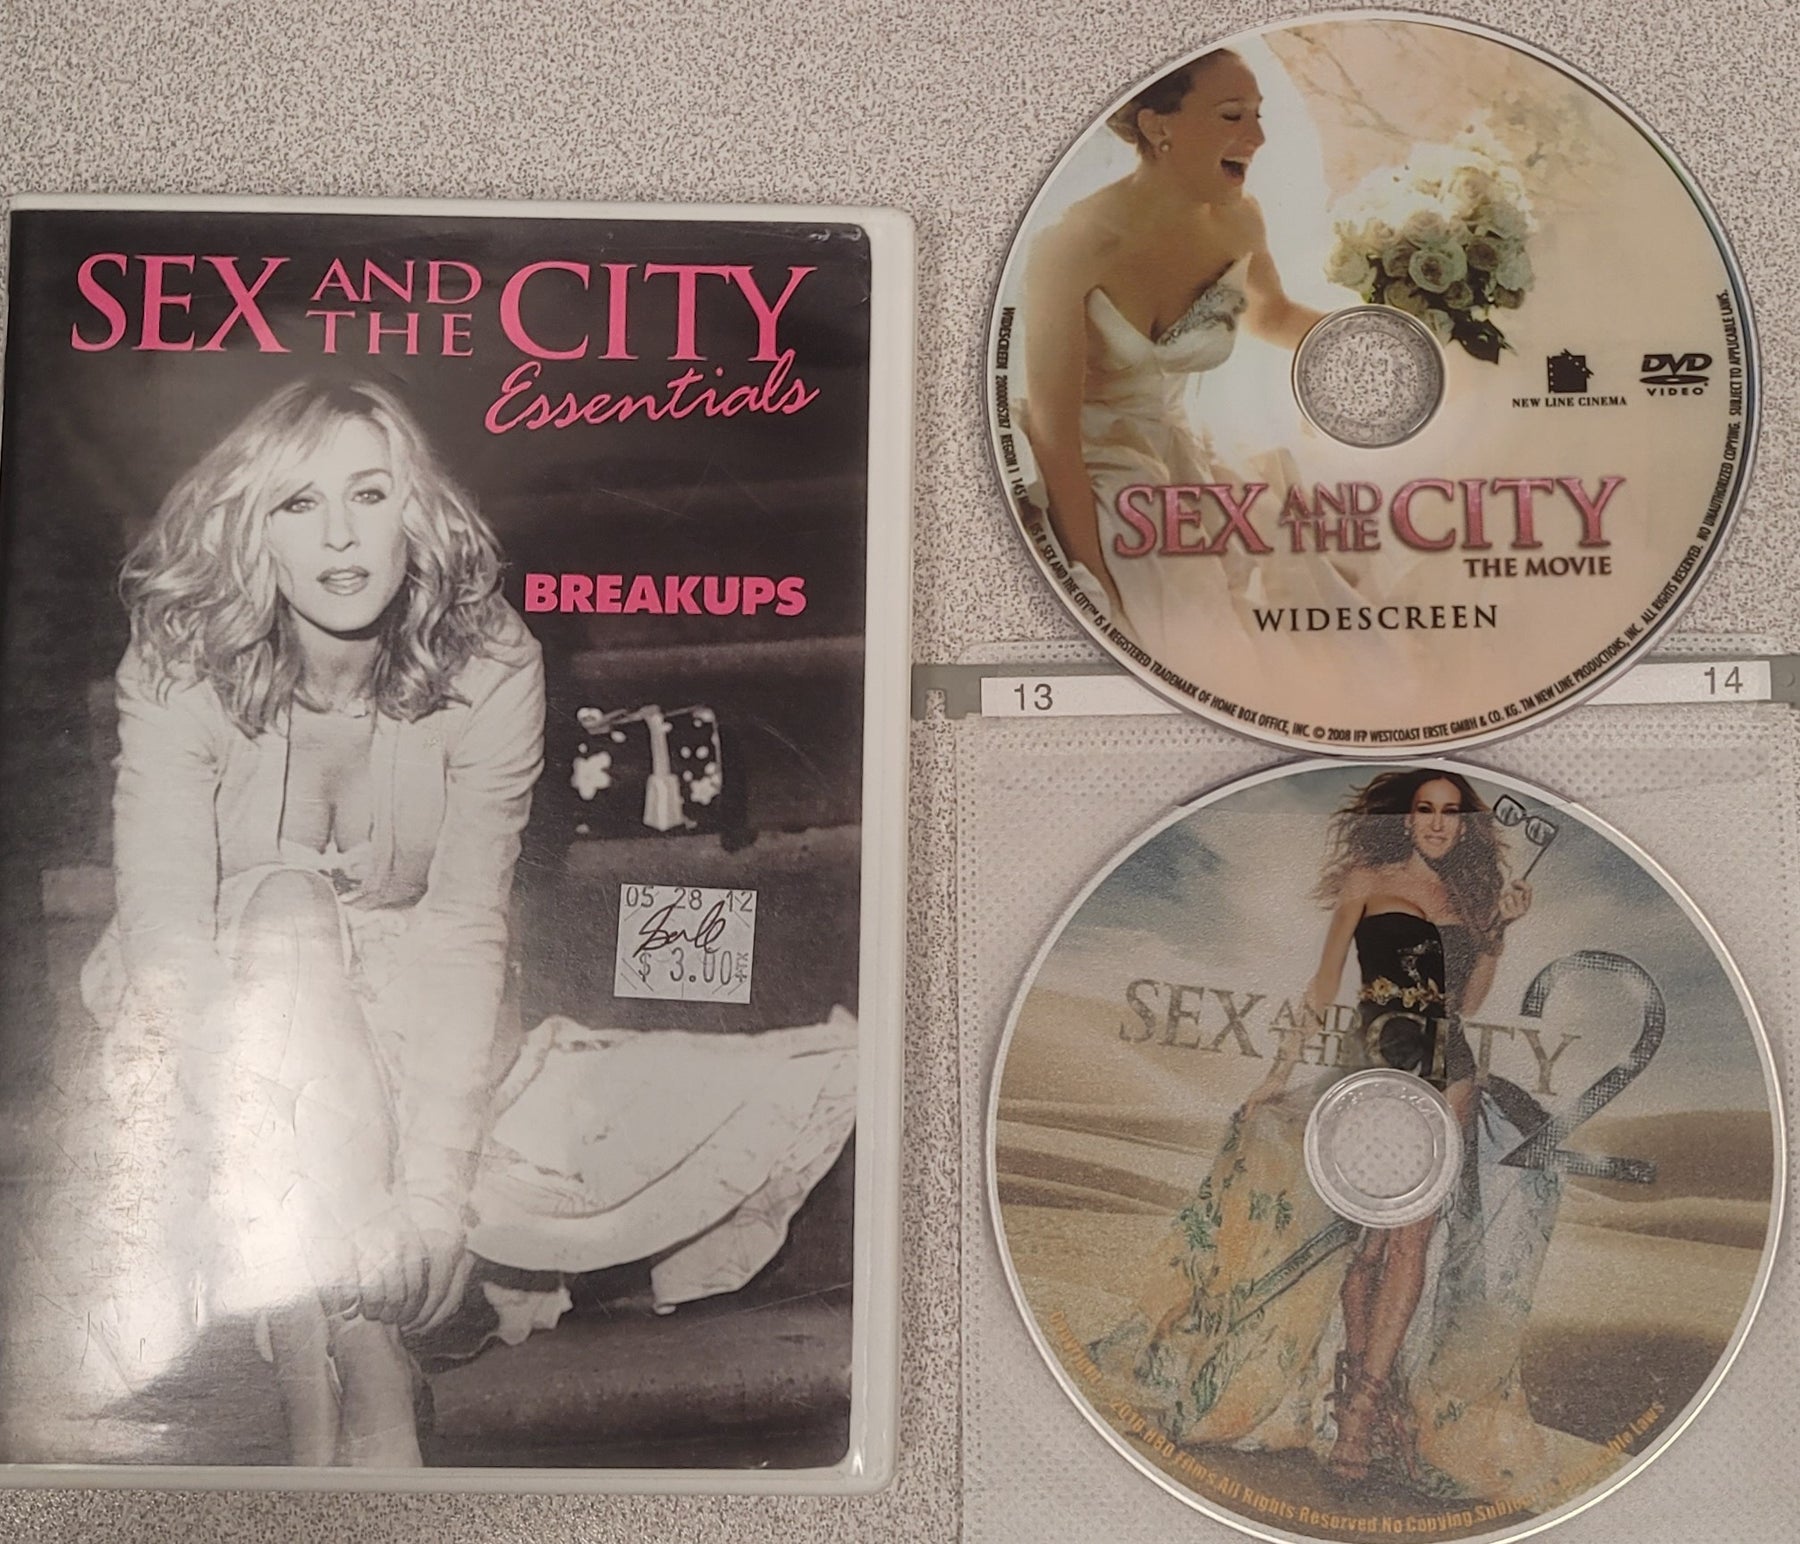 Sex And the City DVD Triple Play Sex and The City 1 and 2, Sex and The City image